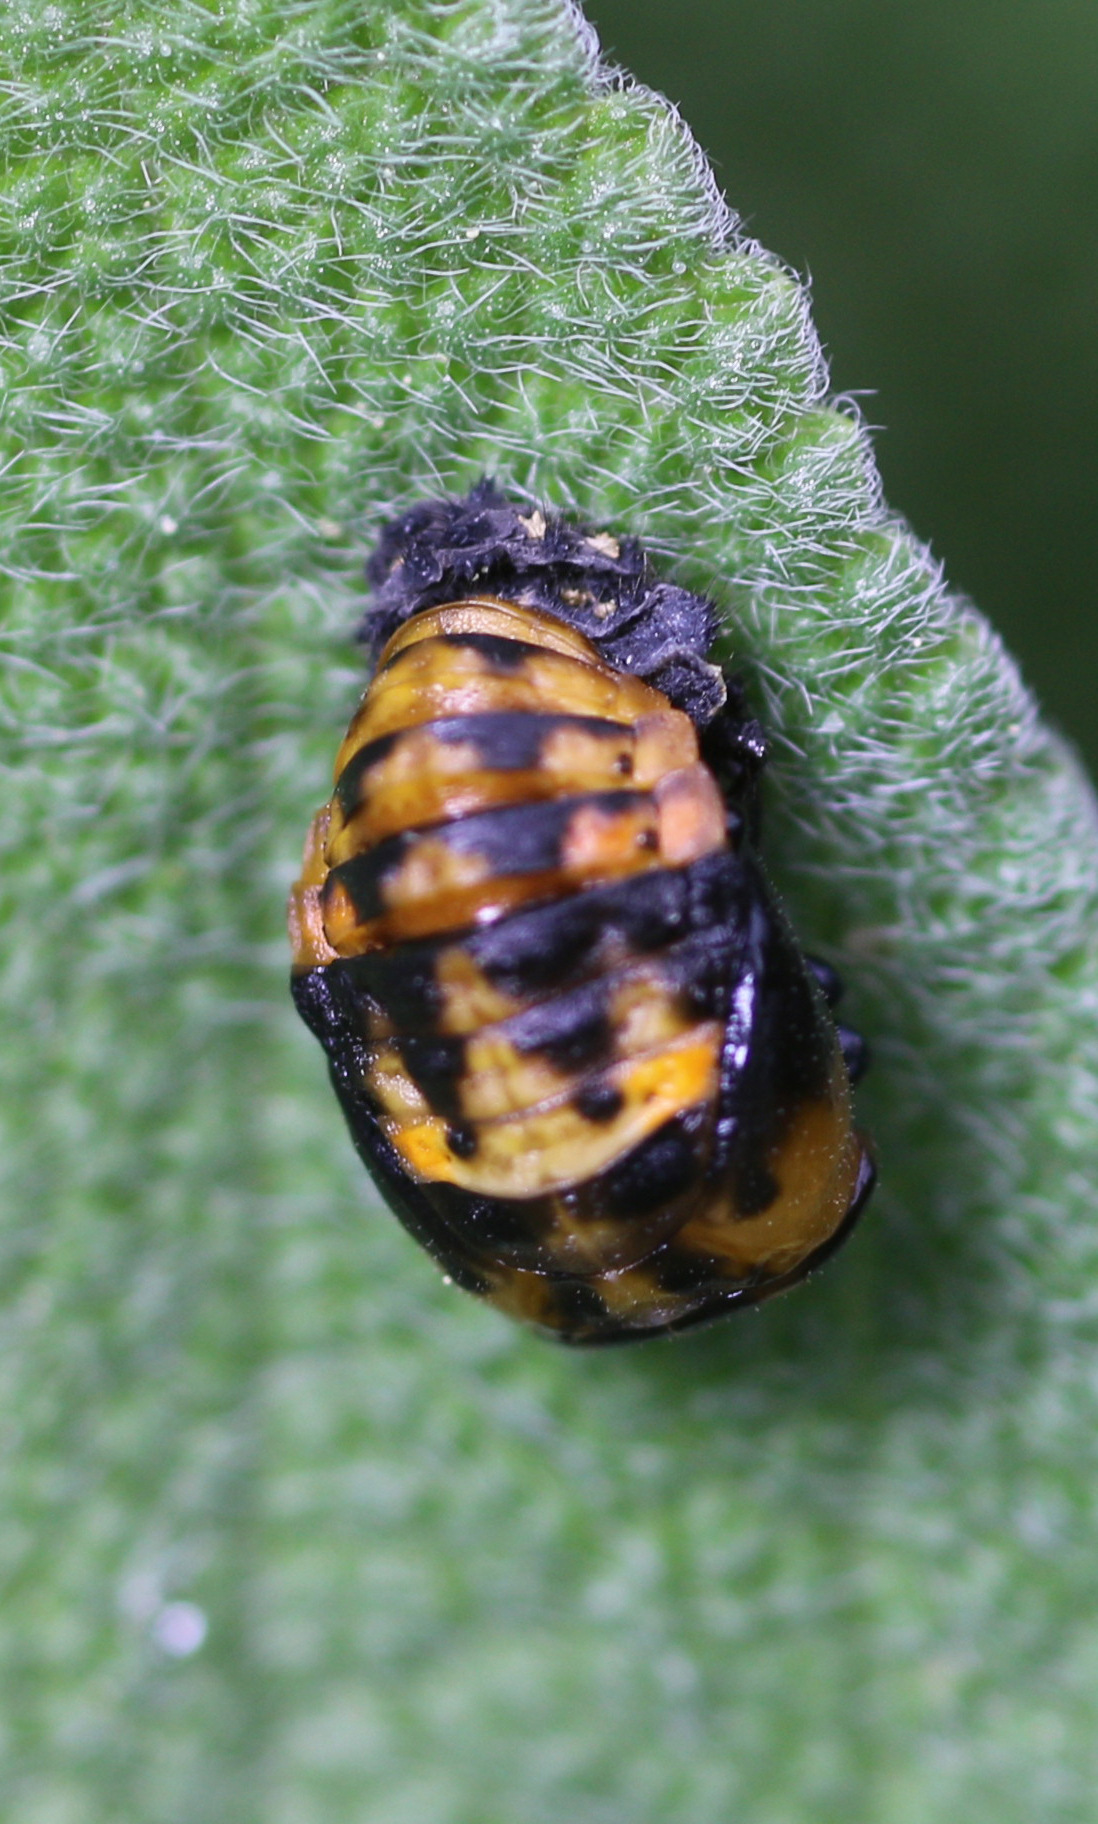 https://www.nps.gov/articles/000/images/IMG_4876-Lady-Bug-Pupa-CSchelz-2020_cropped_1in.jpg